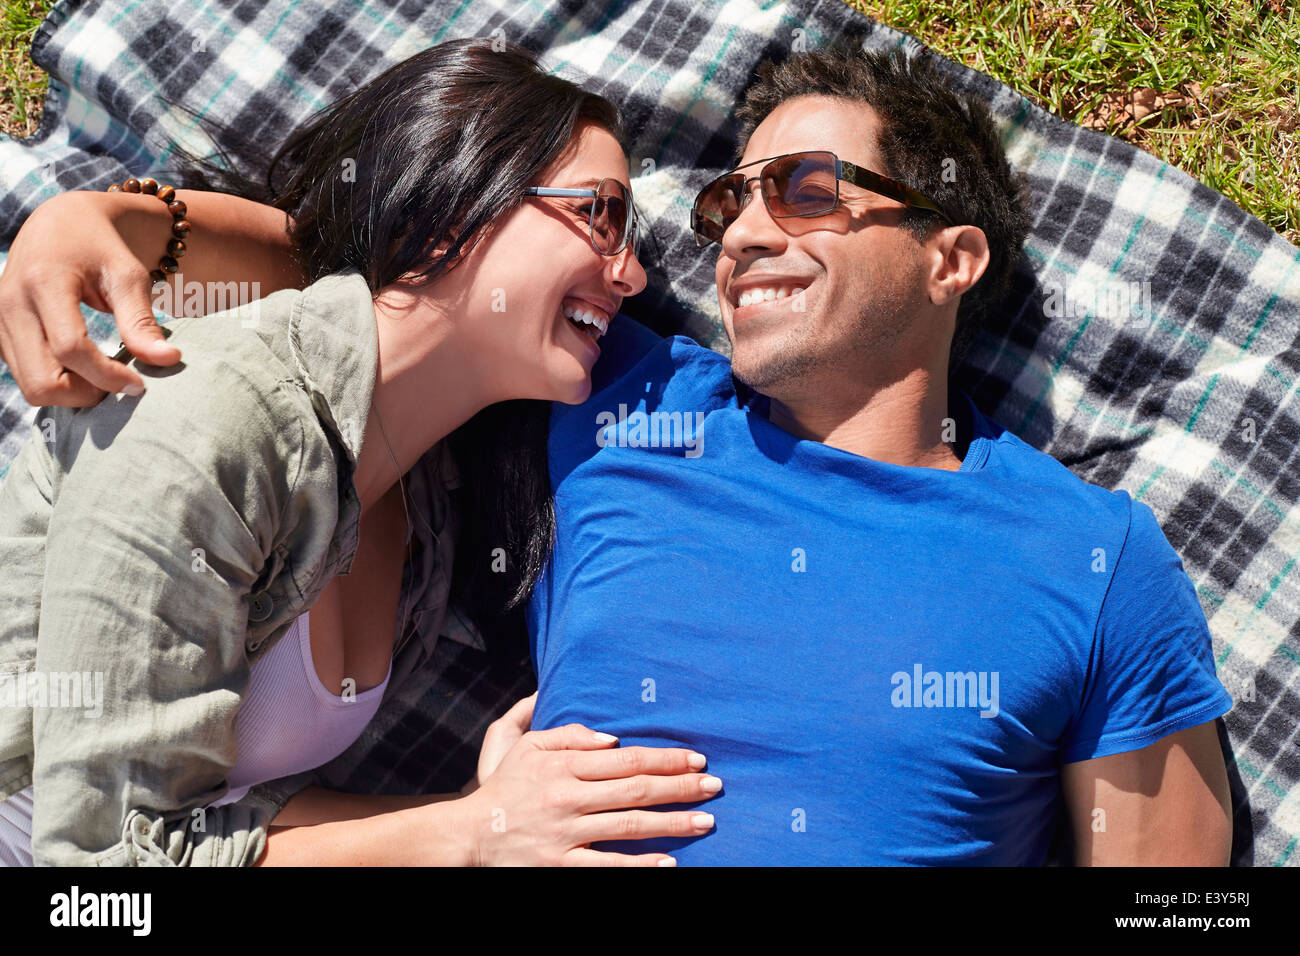 Overhead view of couple on picnic blanket Stock Photo